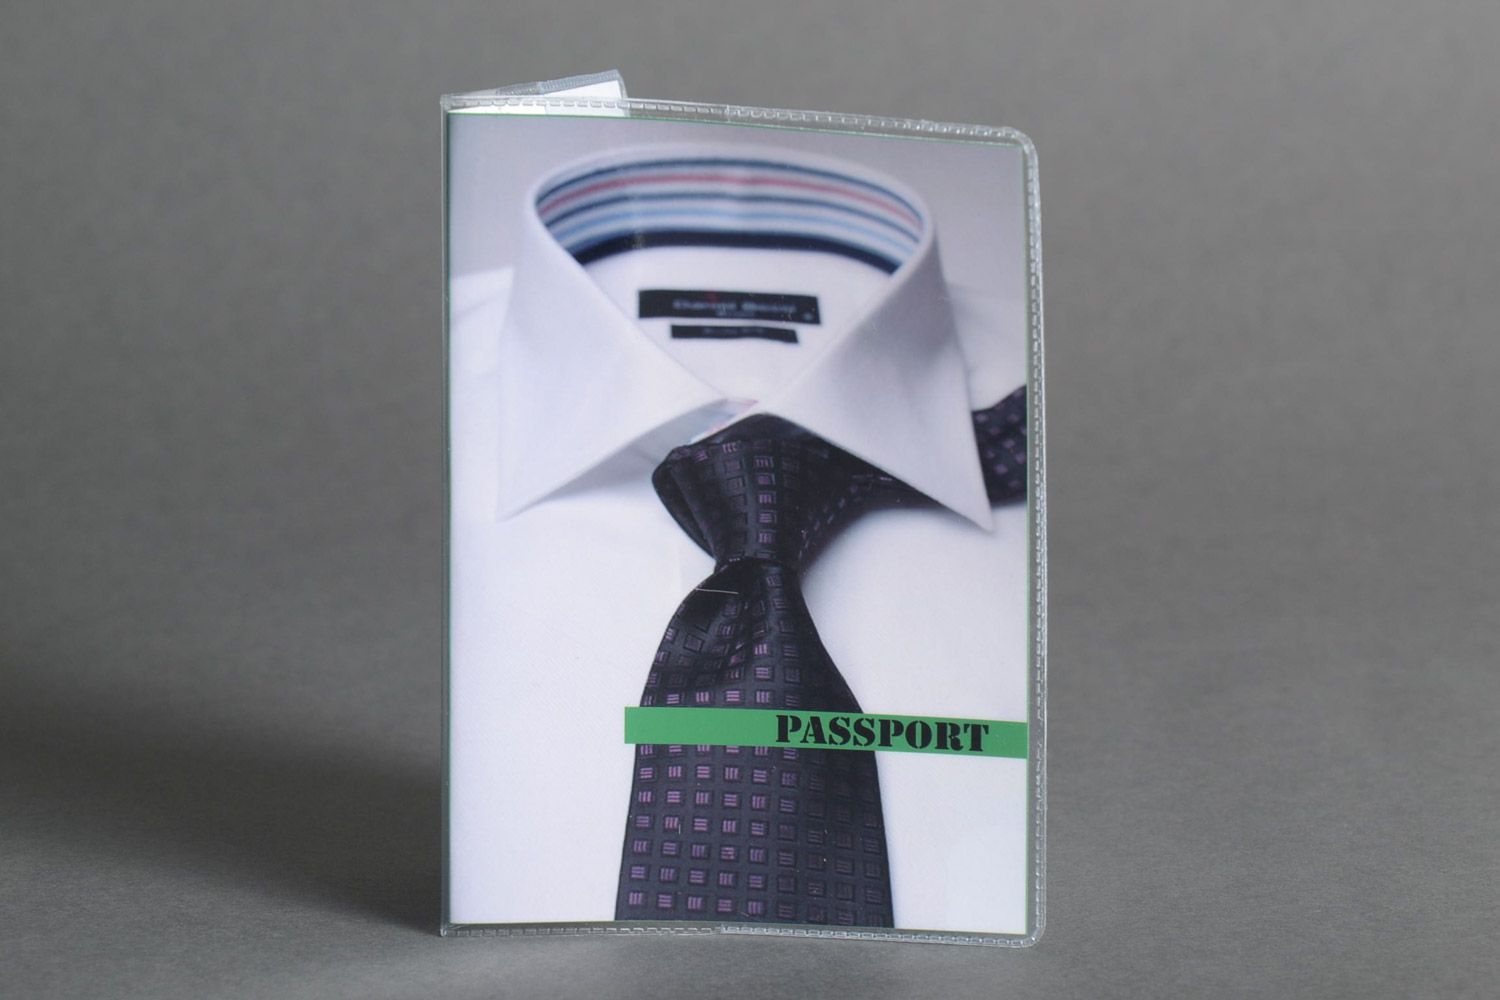 Handmade white plastic passport cover with image of collar and tie for men photo 1